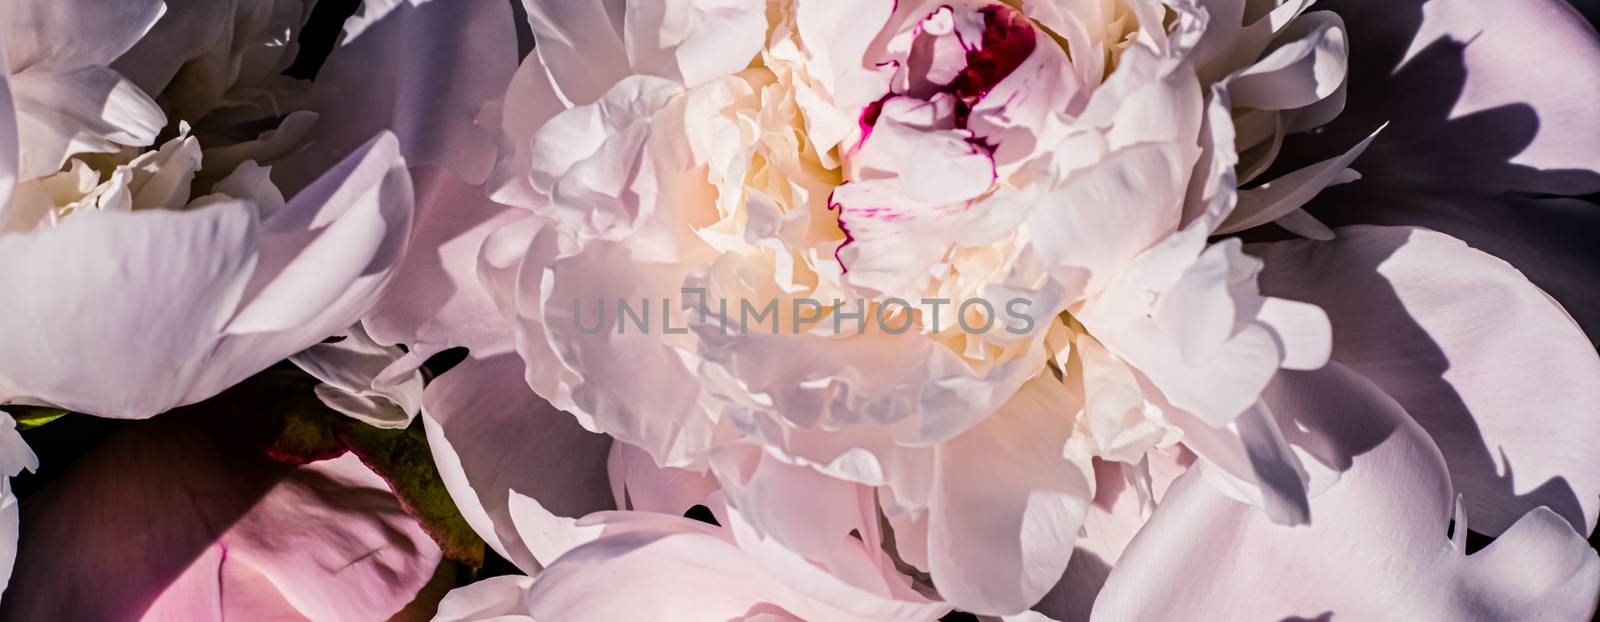 Peony flowers as luxury floral art background, wedding decor and event branding by Anneleven